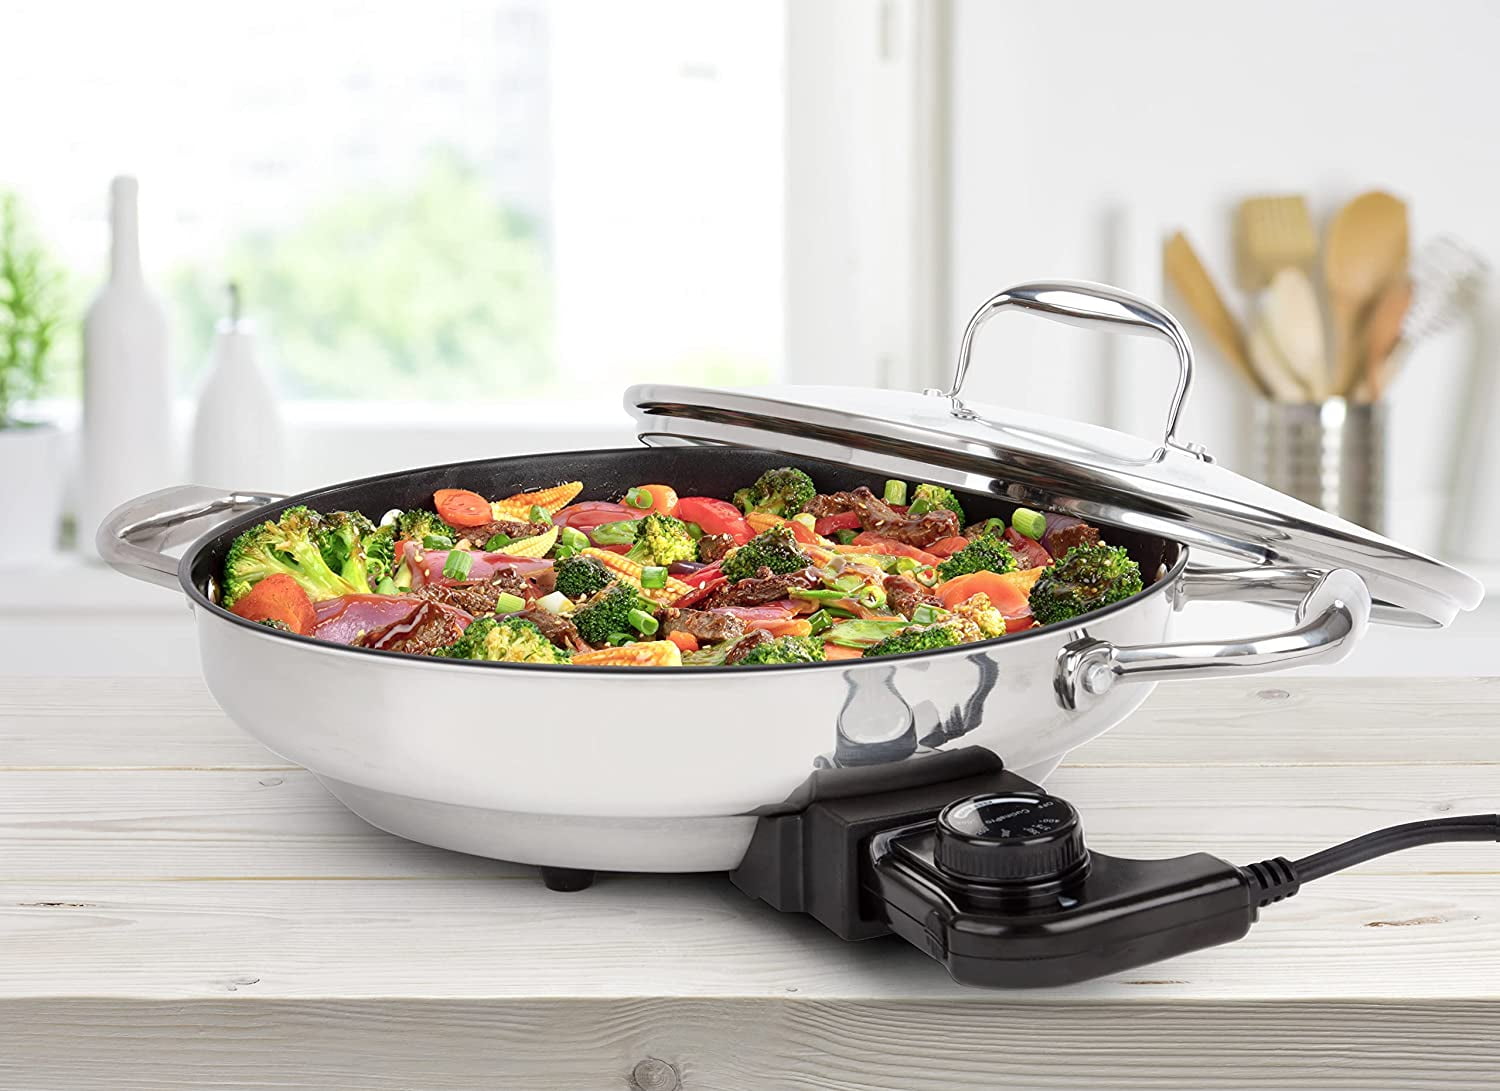 Electric Skillet by Cucina Pro - 18/10 Stainless Steel, Non Stick Interior, with Glass Lid, 12 Round